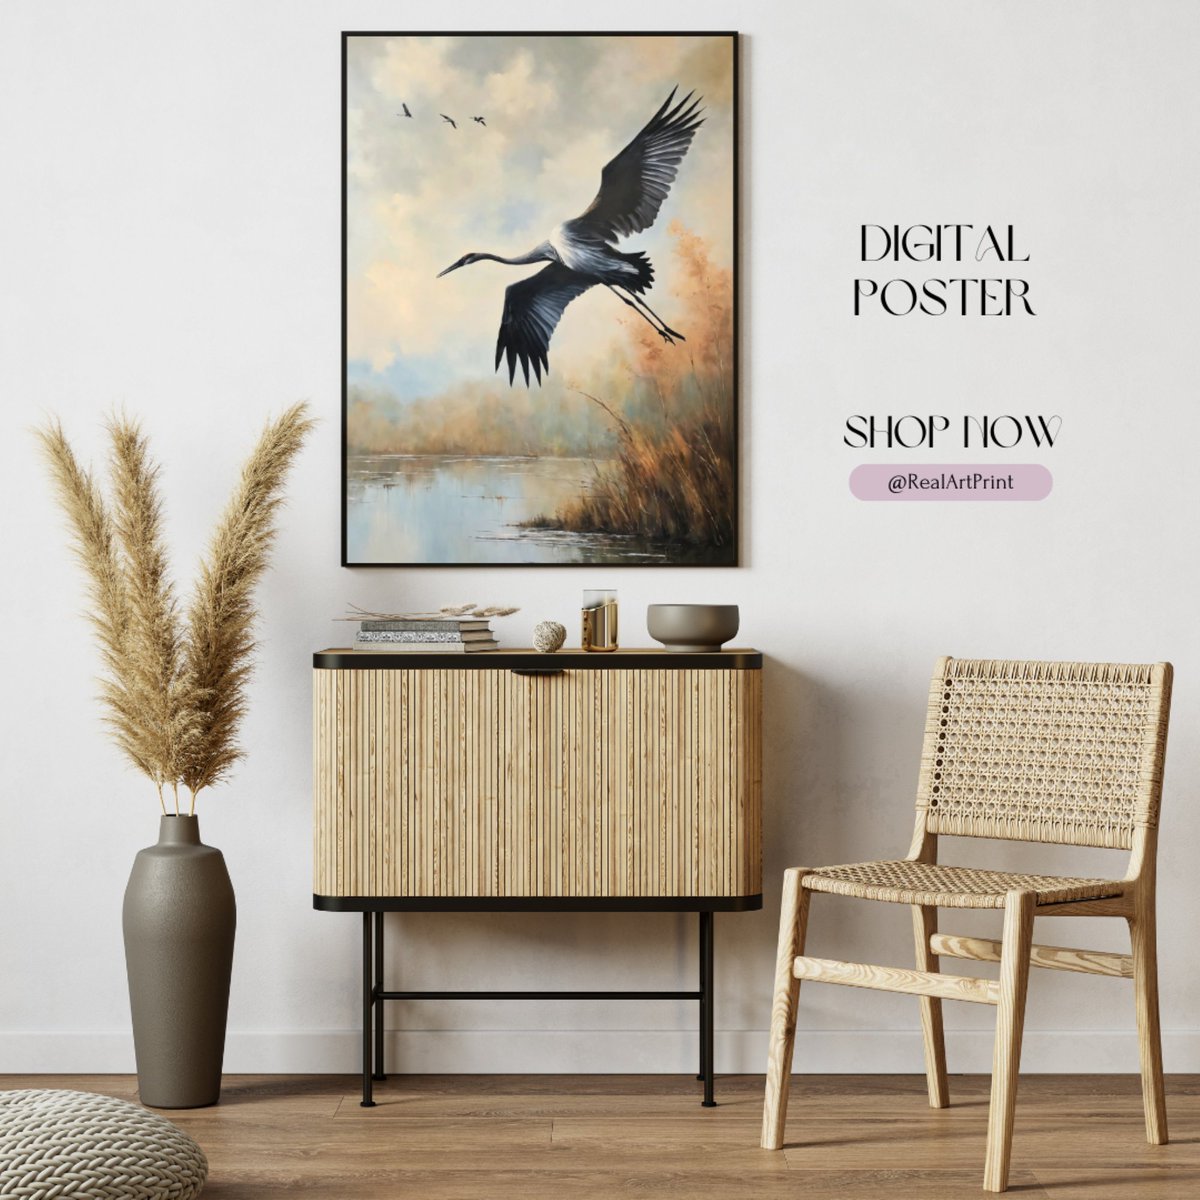 Elevate your home decor with our stunning Birds Oil Painting! 🖼️ Perfect for nature lovers and art enthusiasts alike. etsy.me/3JQUBYx
#BirdPainting #NatureArt #WildlifeDecor #RealArtPrint #PrintableArt #DigitalDownload #homedecor #ArtLovers #DecorInspiration